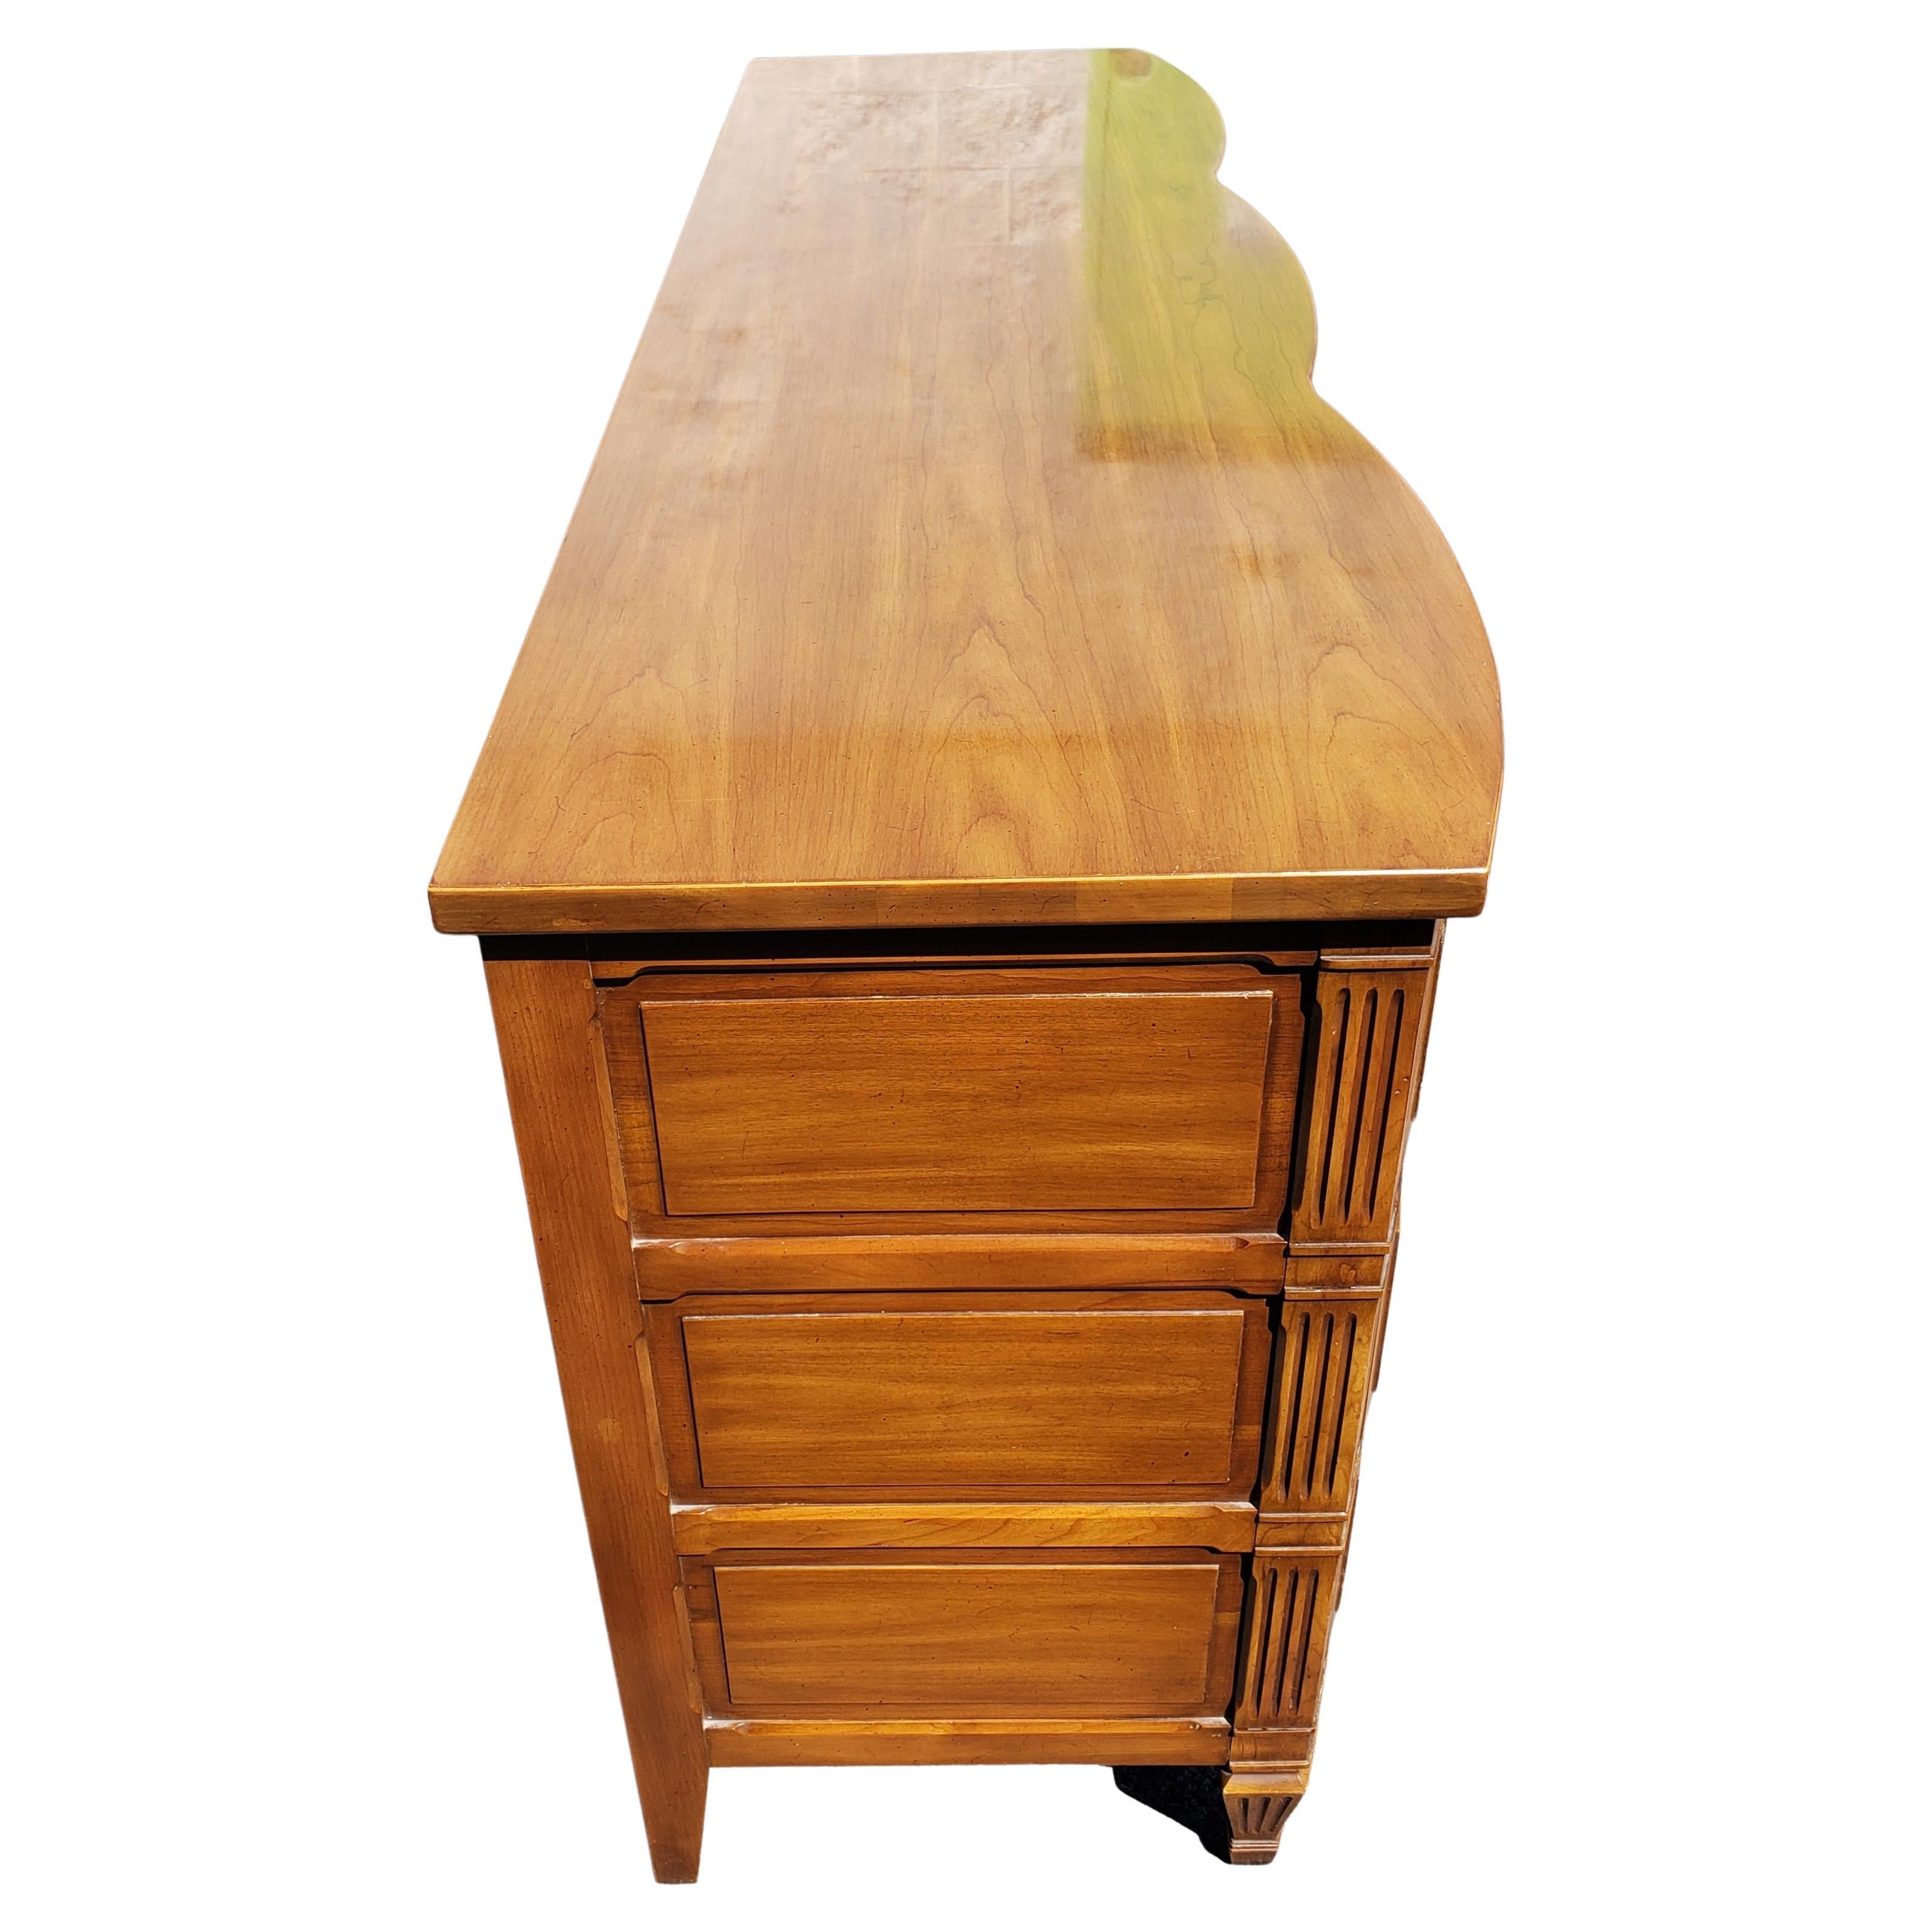 20th Century John Widdicomb French Country Serpentine Dresser with Glass Top, circa 1950s For Sale